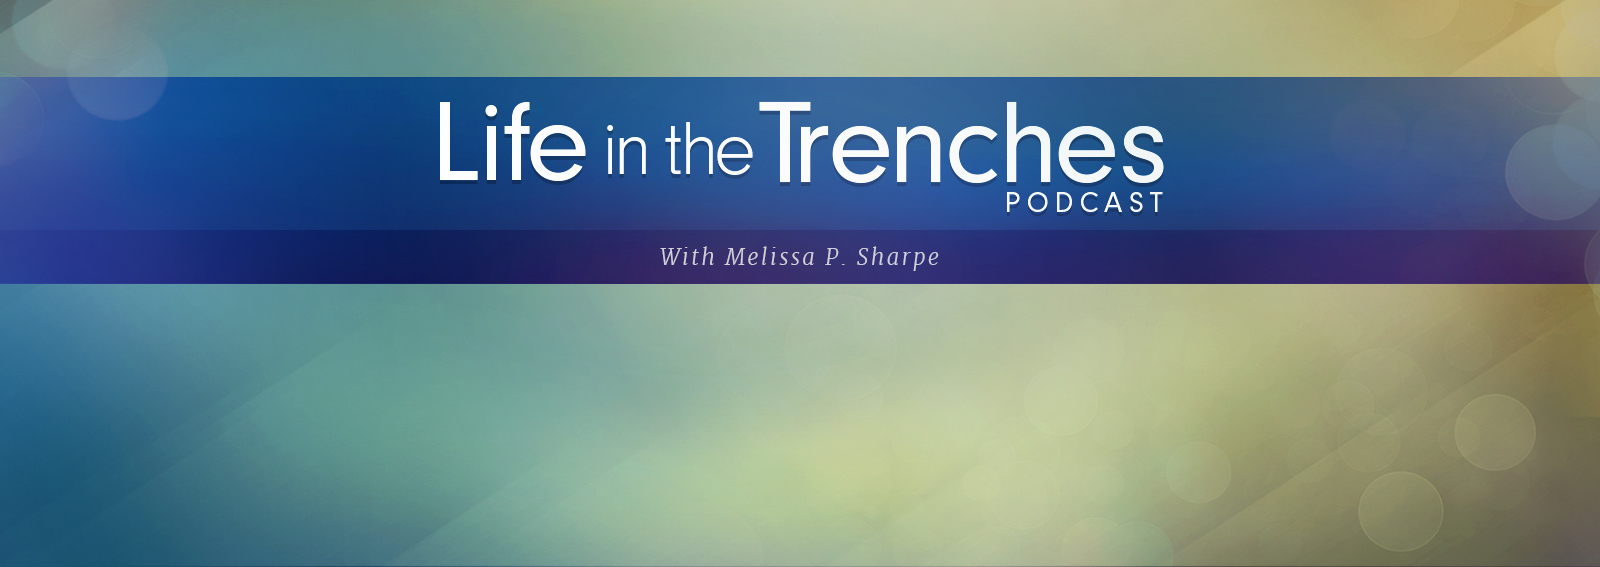 Life In The Trenches Podcast